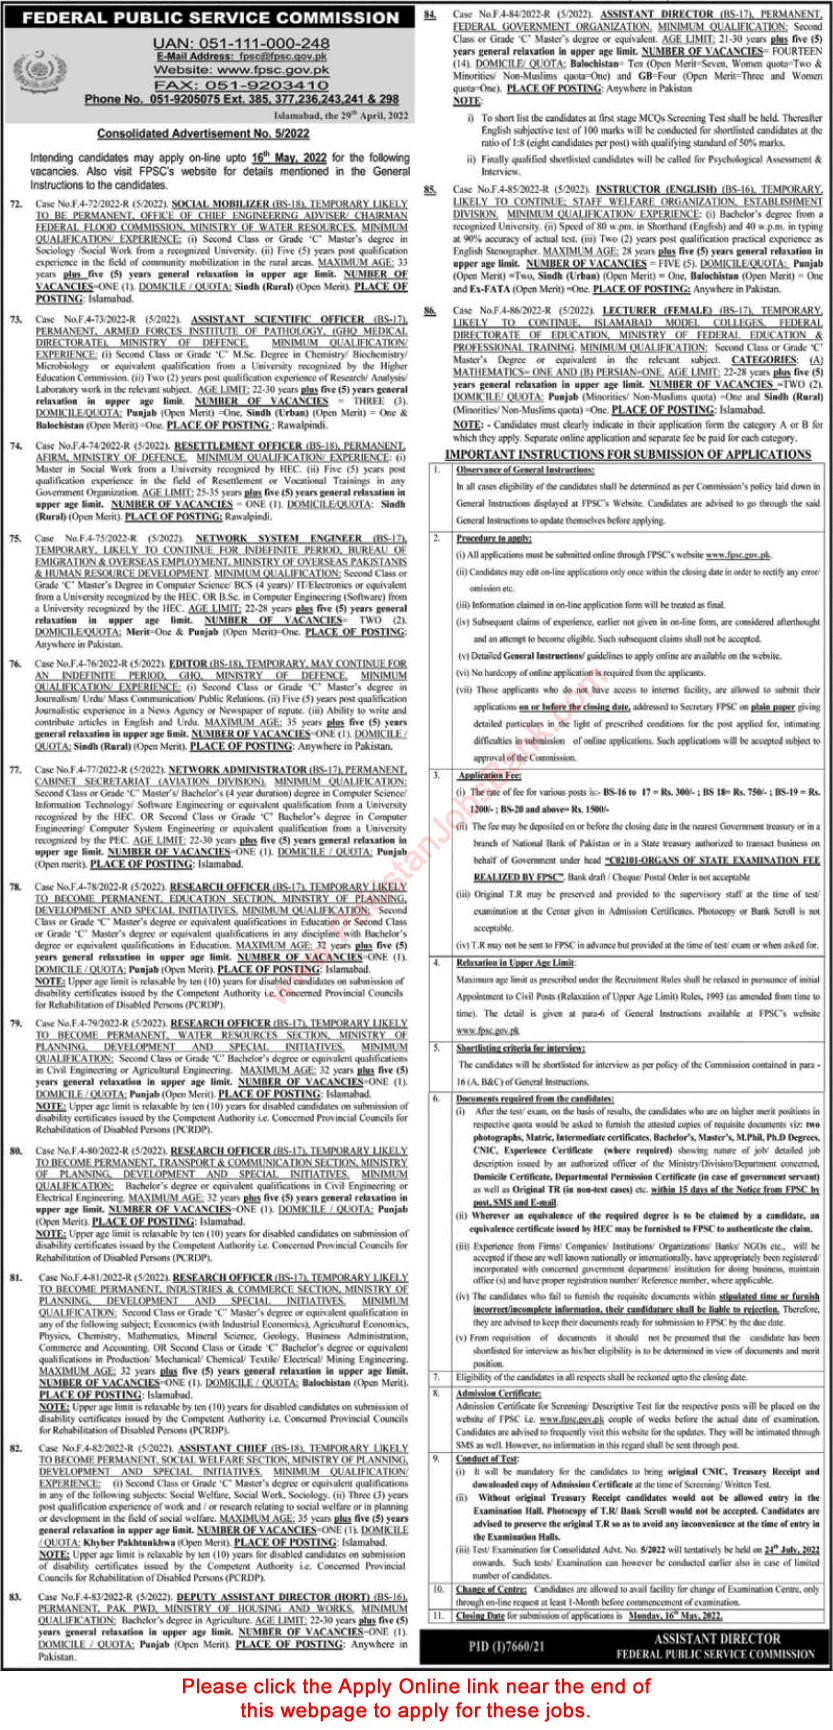 FPSC Jobs May 2022 Apply Online Consolidated Advertisement No 05/2022 5/2022 Latest